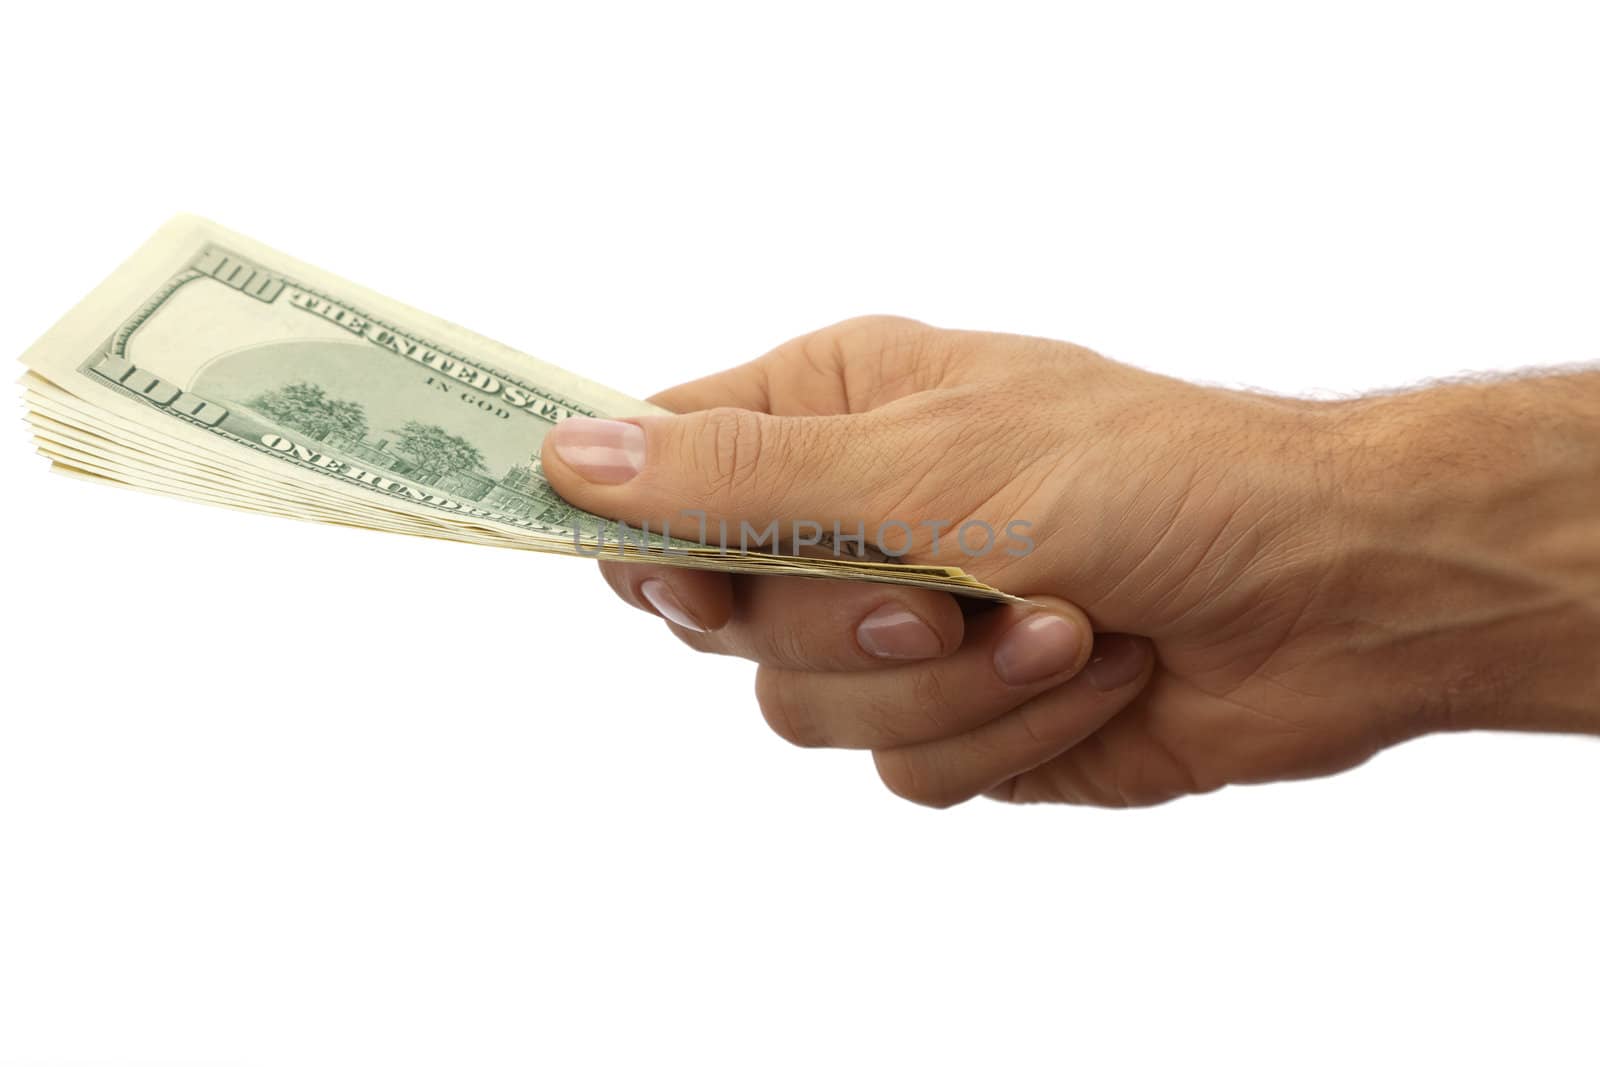 Pack of dollars in the men's hand. Isolated on white